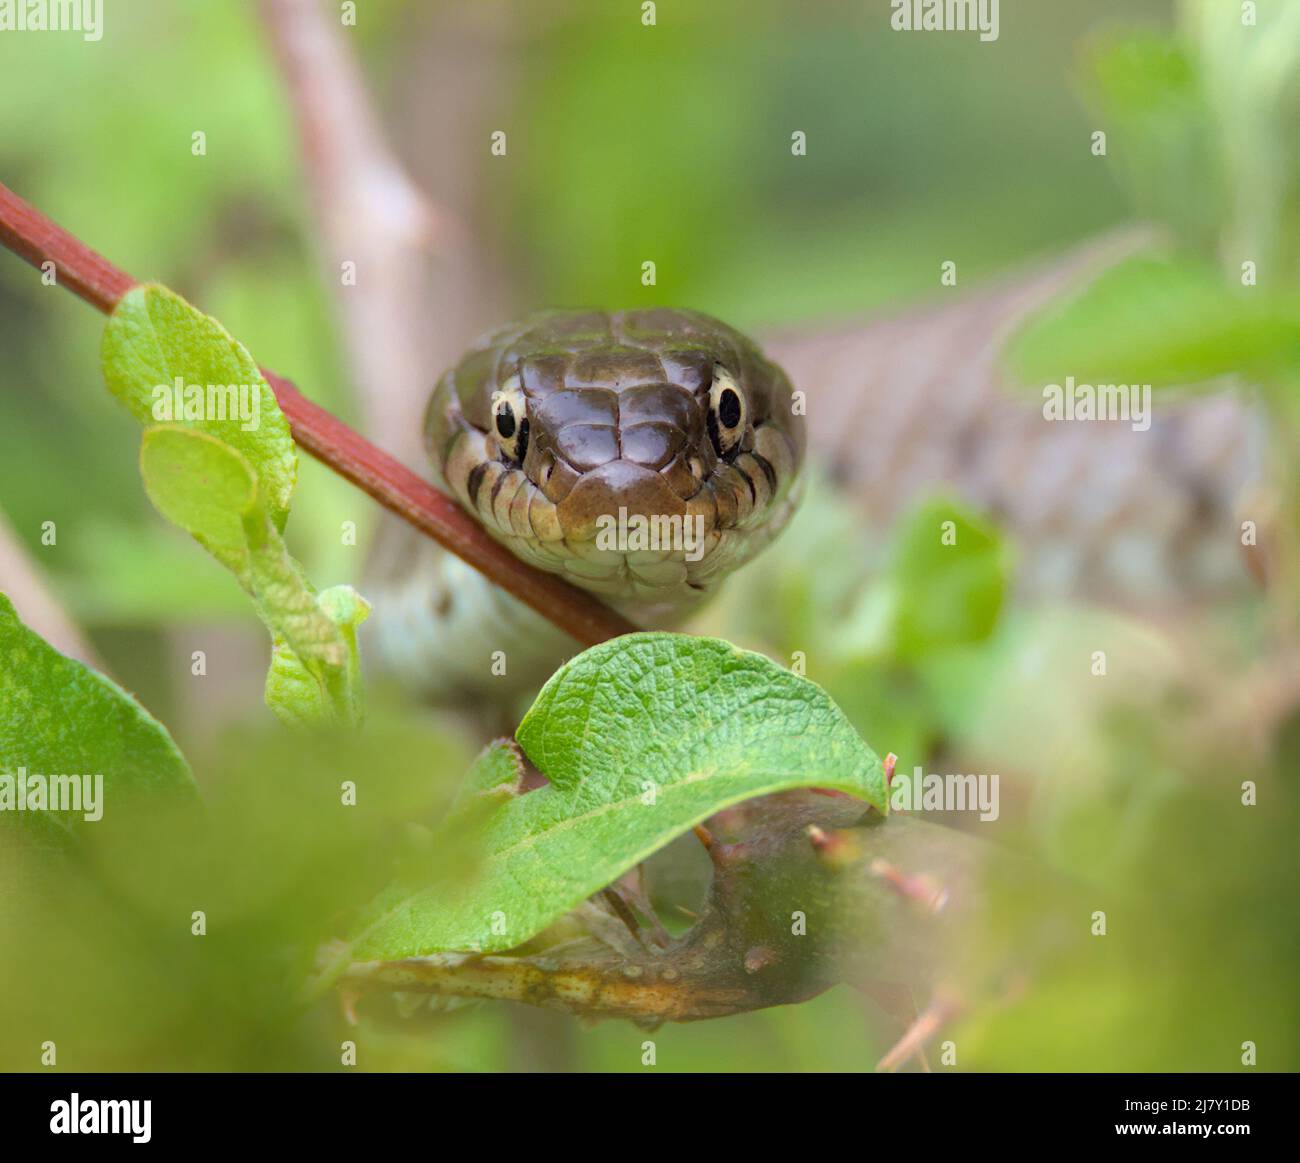 Head Shot From The Front Of A Harmless Barred Grass Snake, Natrix helvetica, UK Stock Photo